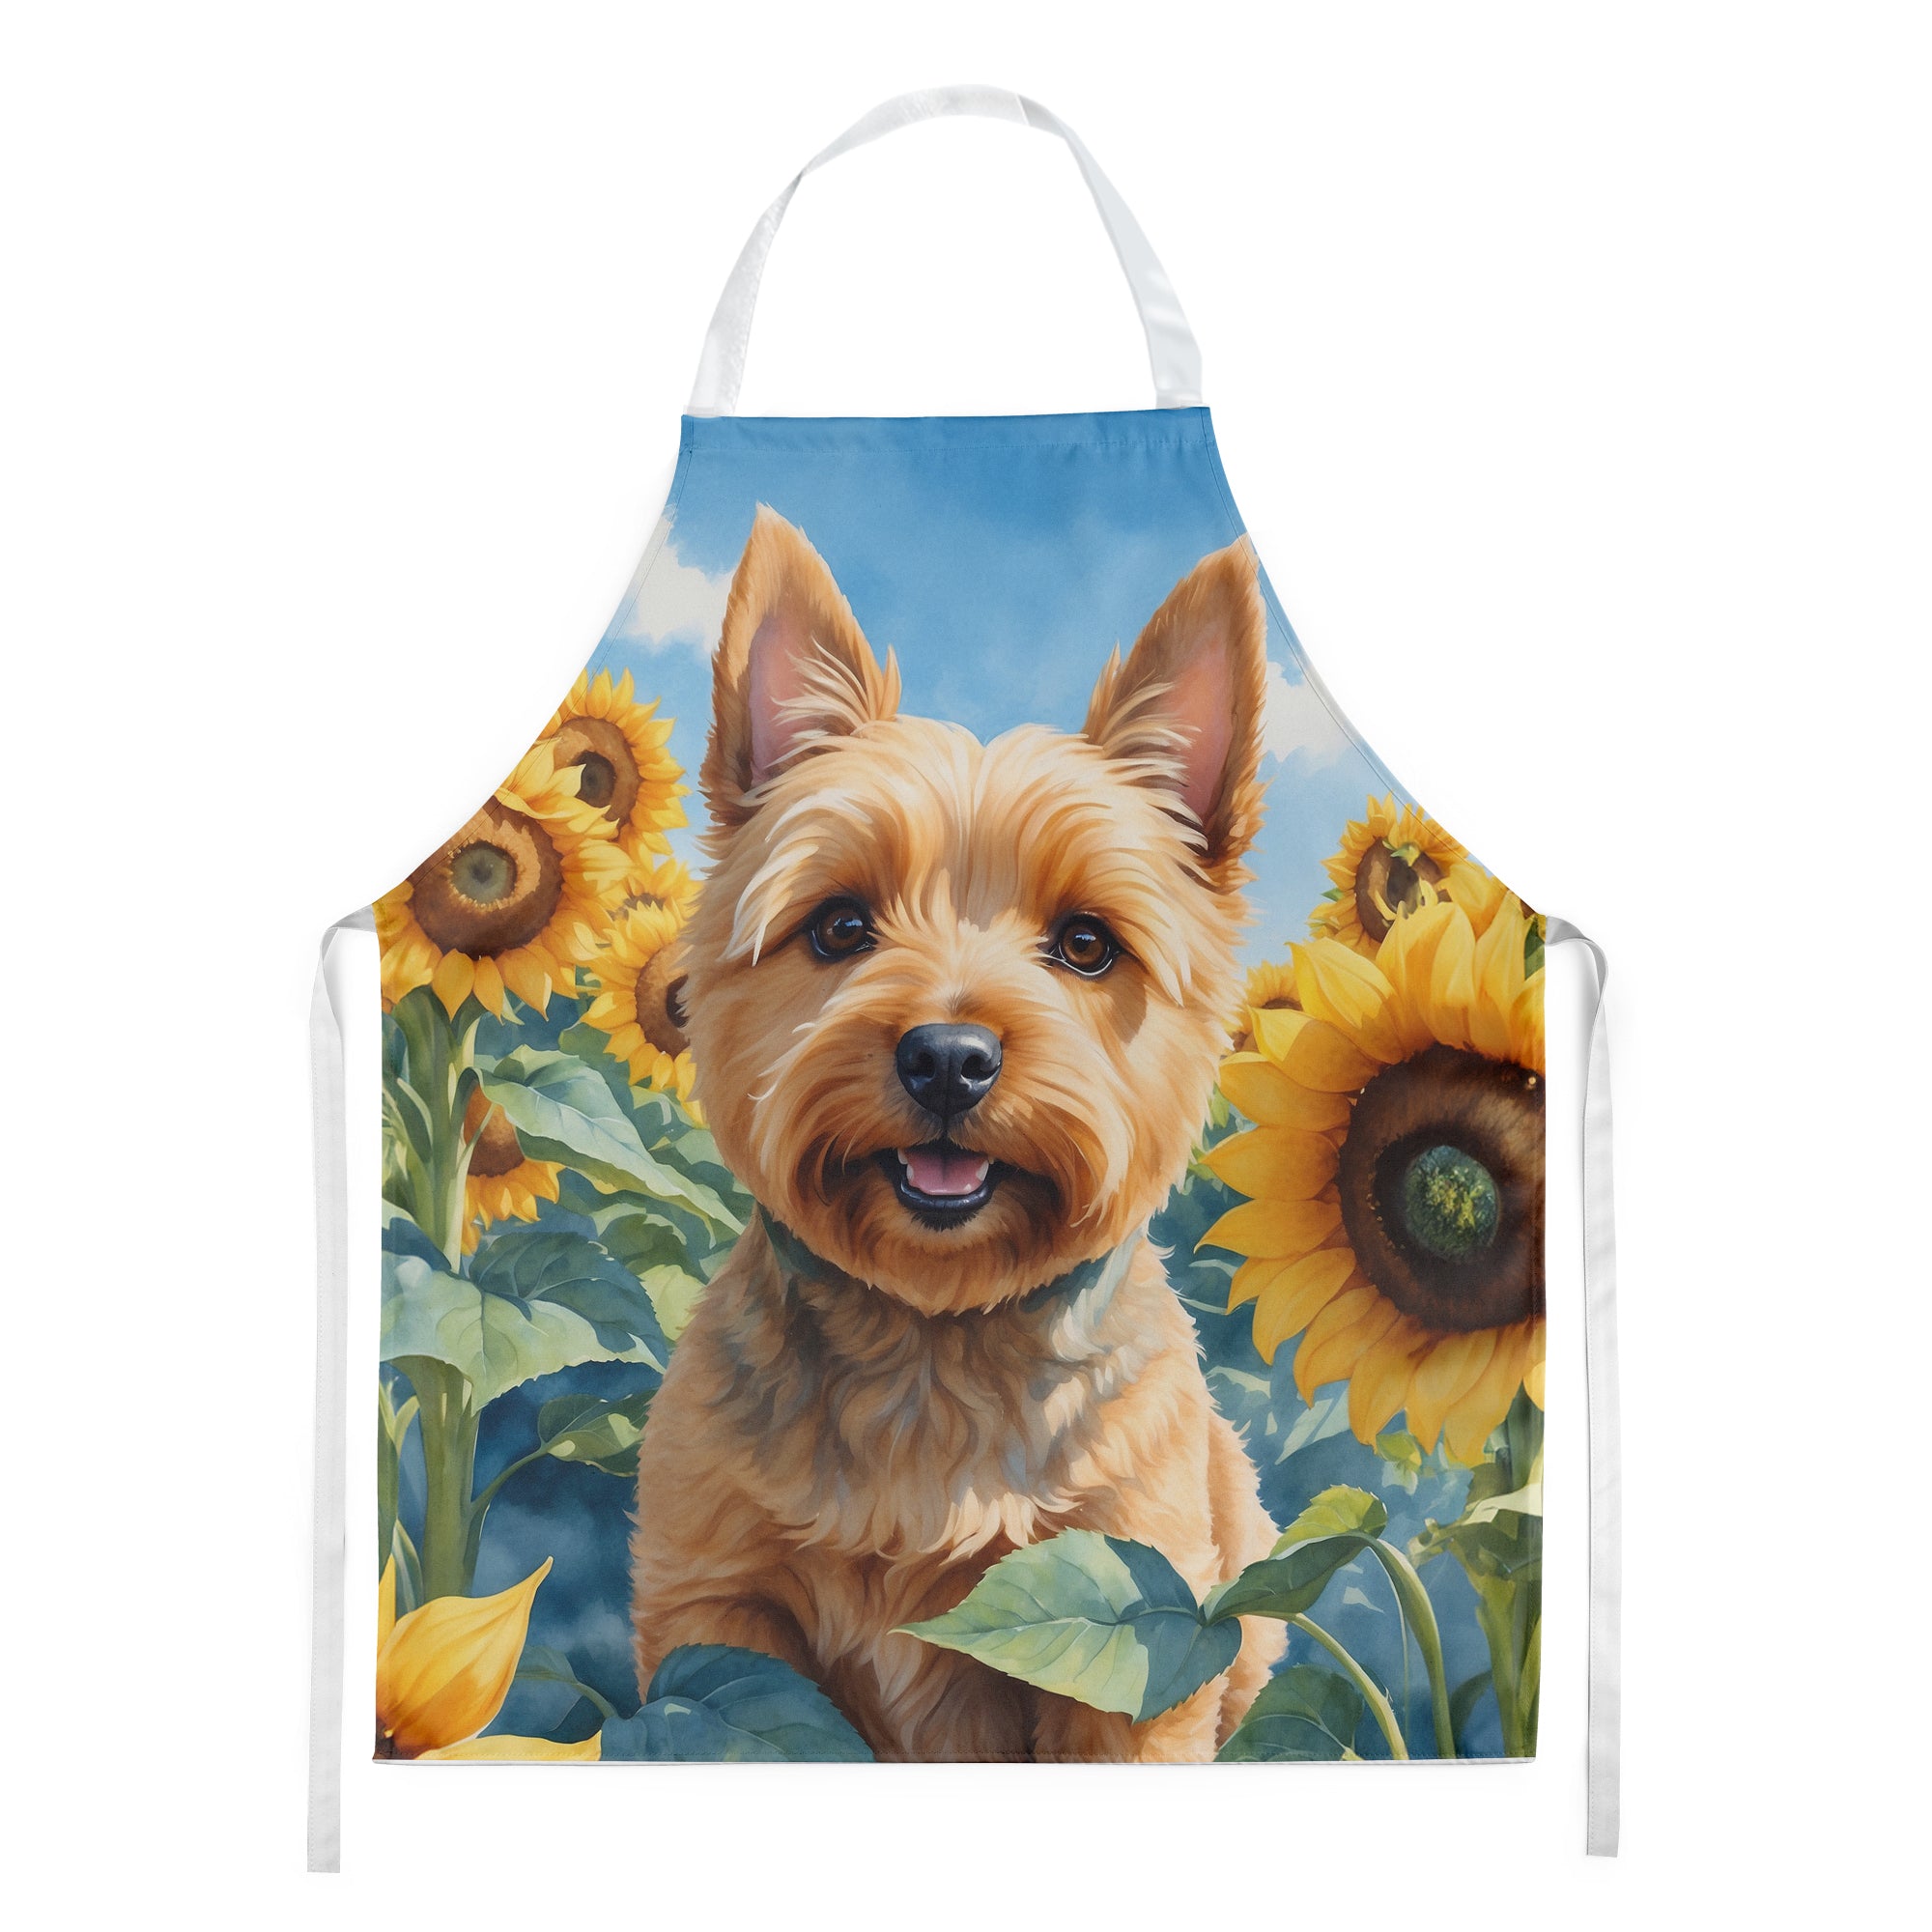 Buy this Norwich Terrier in Sunflowers Apron